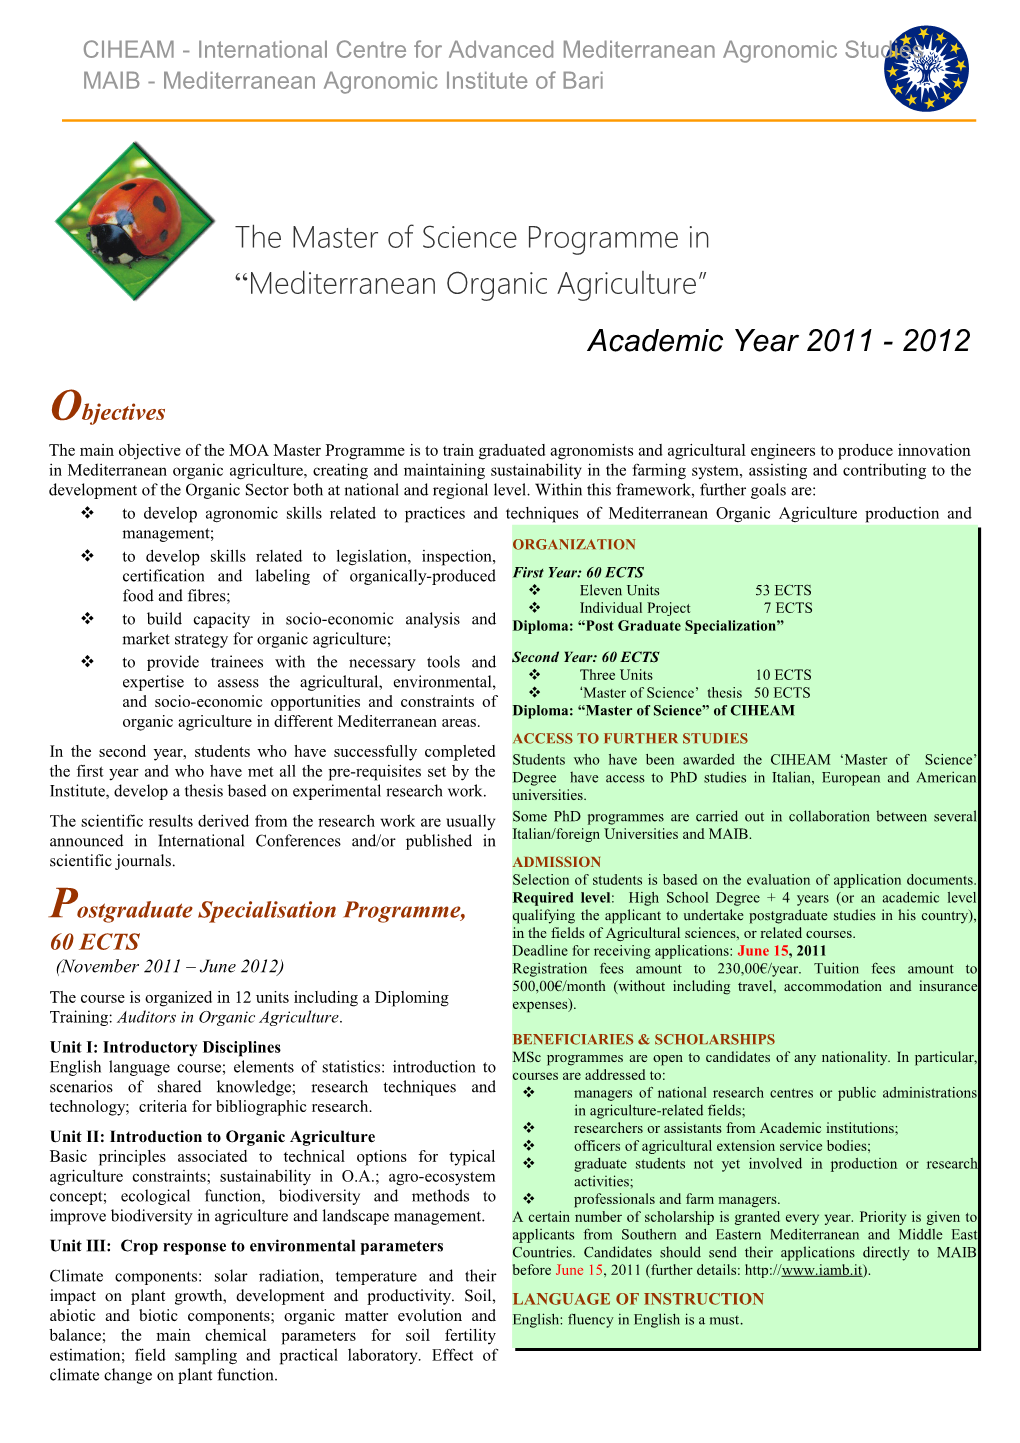 The Master of Science Programme In